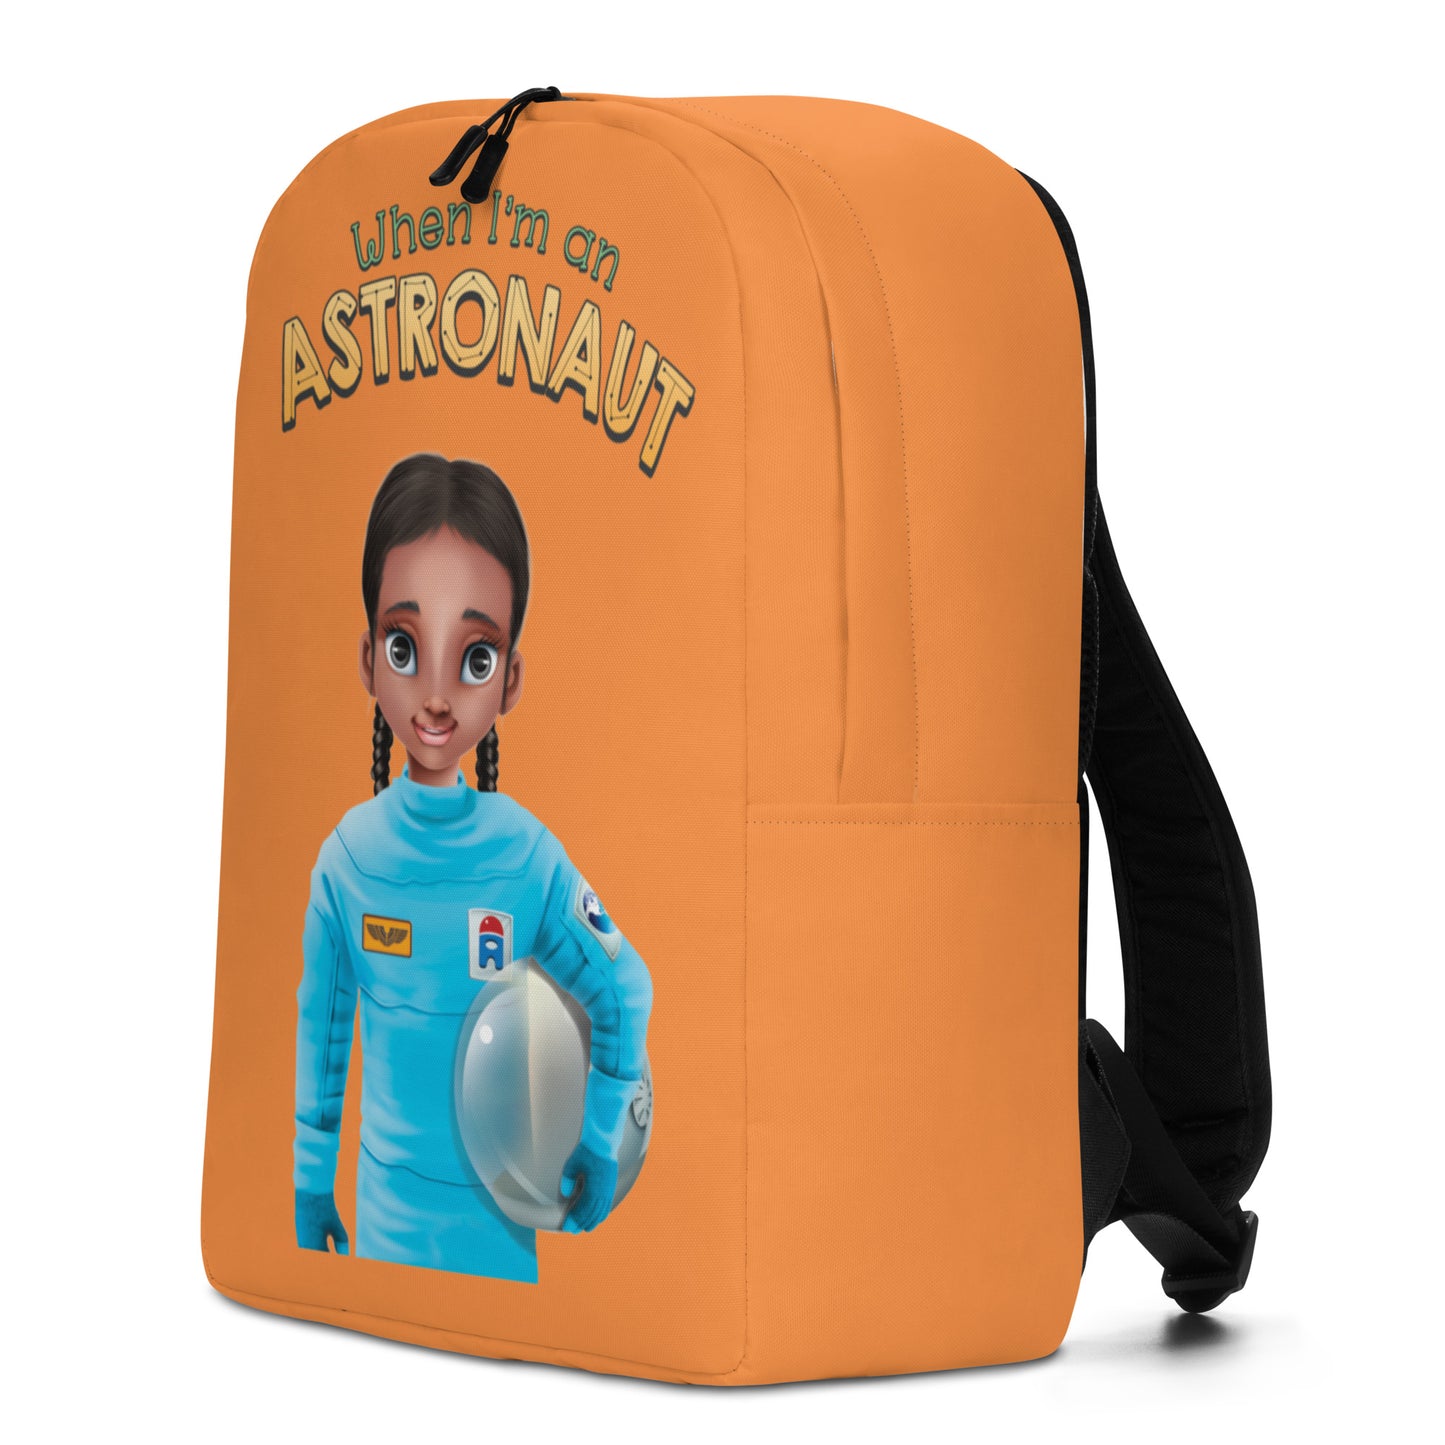 The best-seller smart STEM girls’ backpack for aspiring astronauts and space workers.